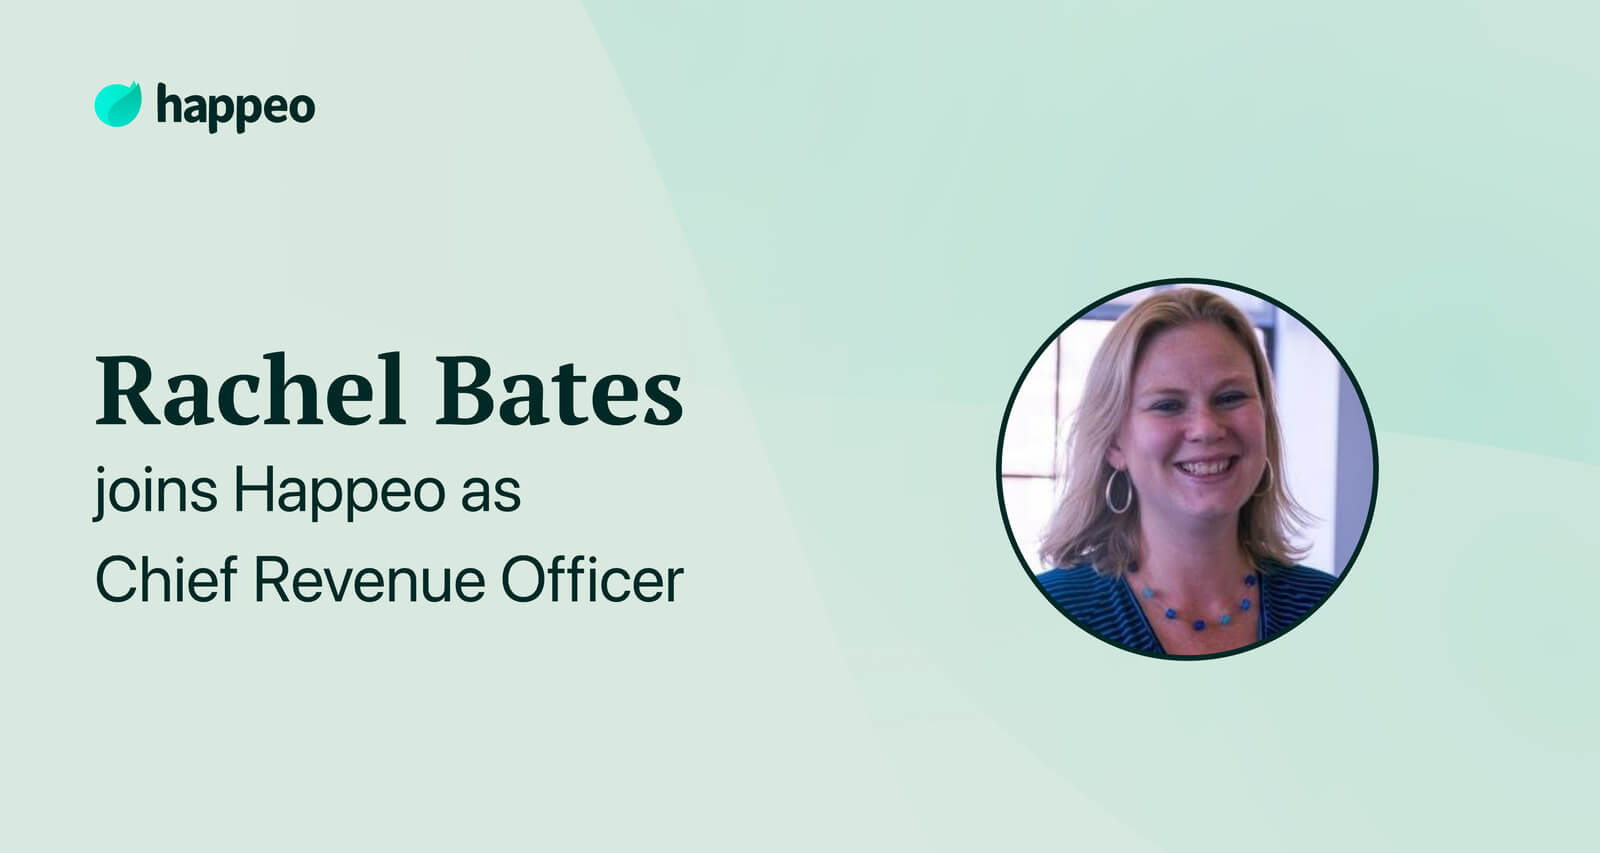 Rachel Bates joins Happeo as Chief Revenue Officer to power the company’s next wave of growth